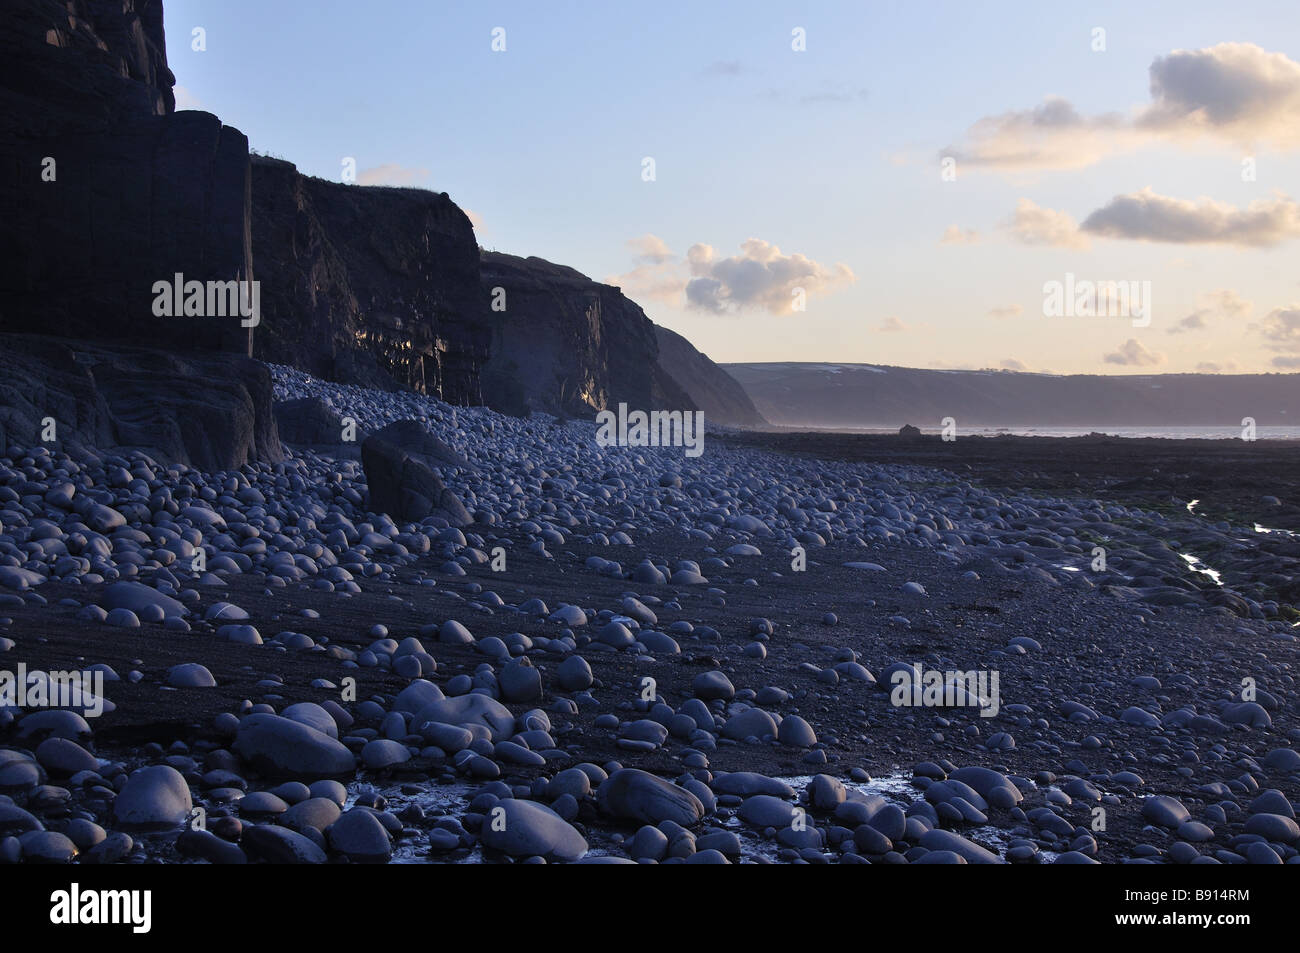 Cliffs and pebbles at dusk Stock Photo